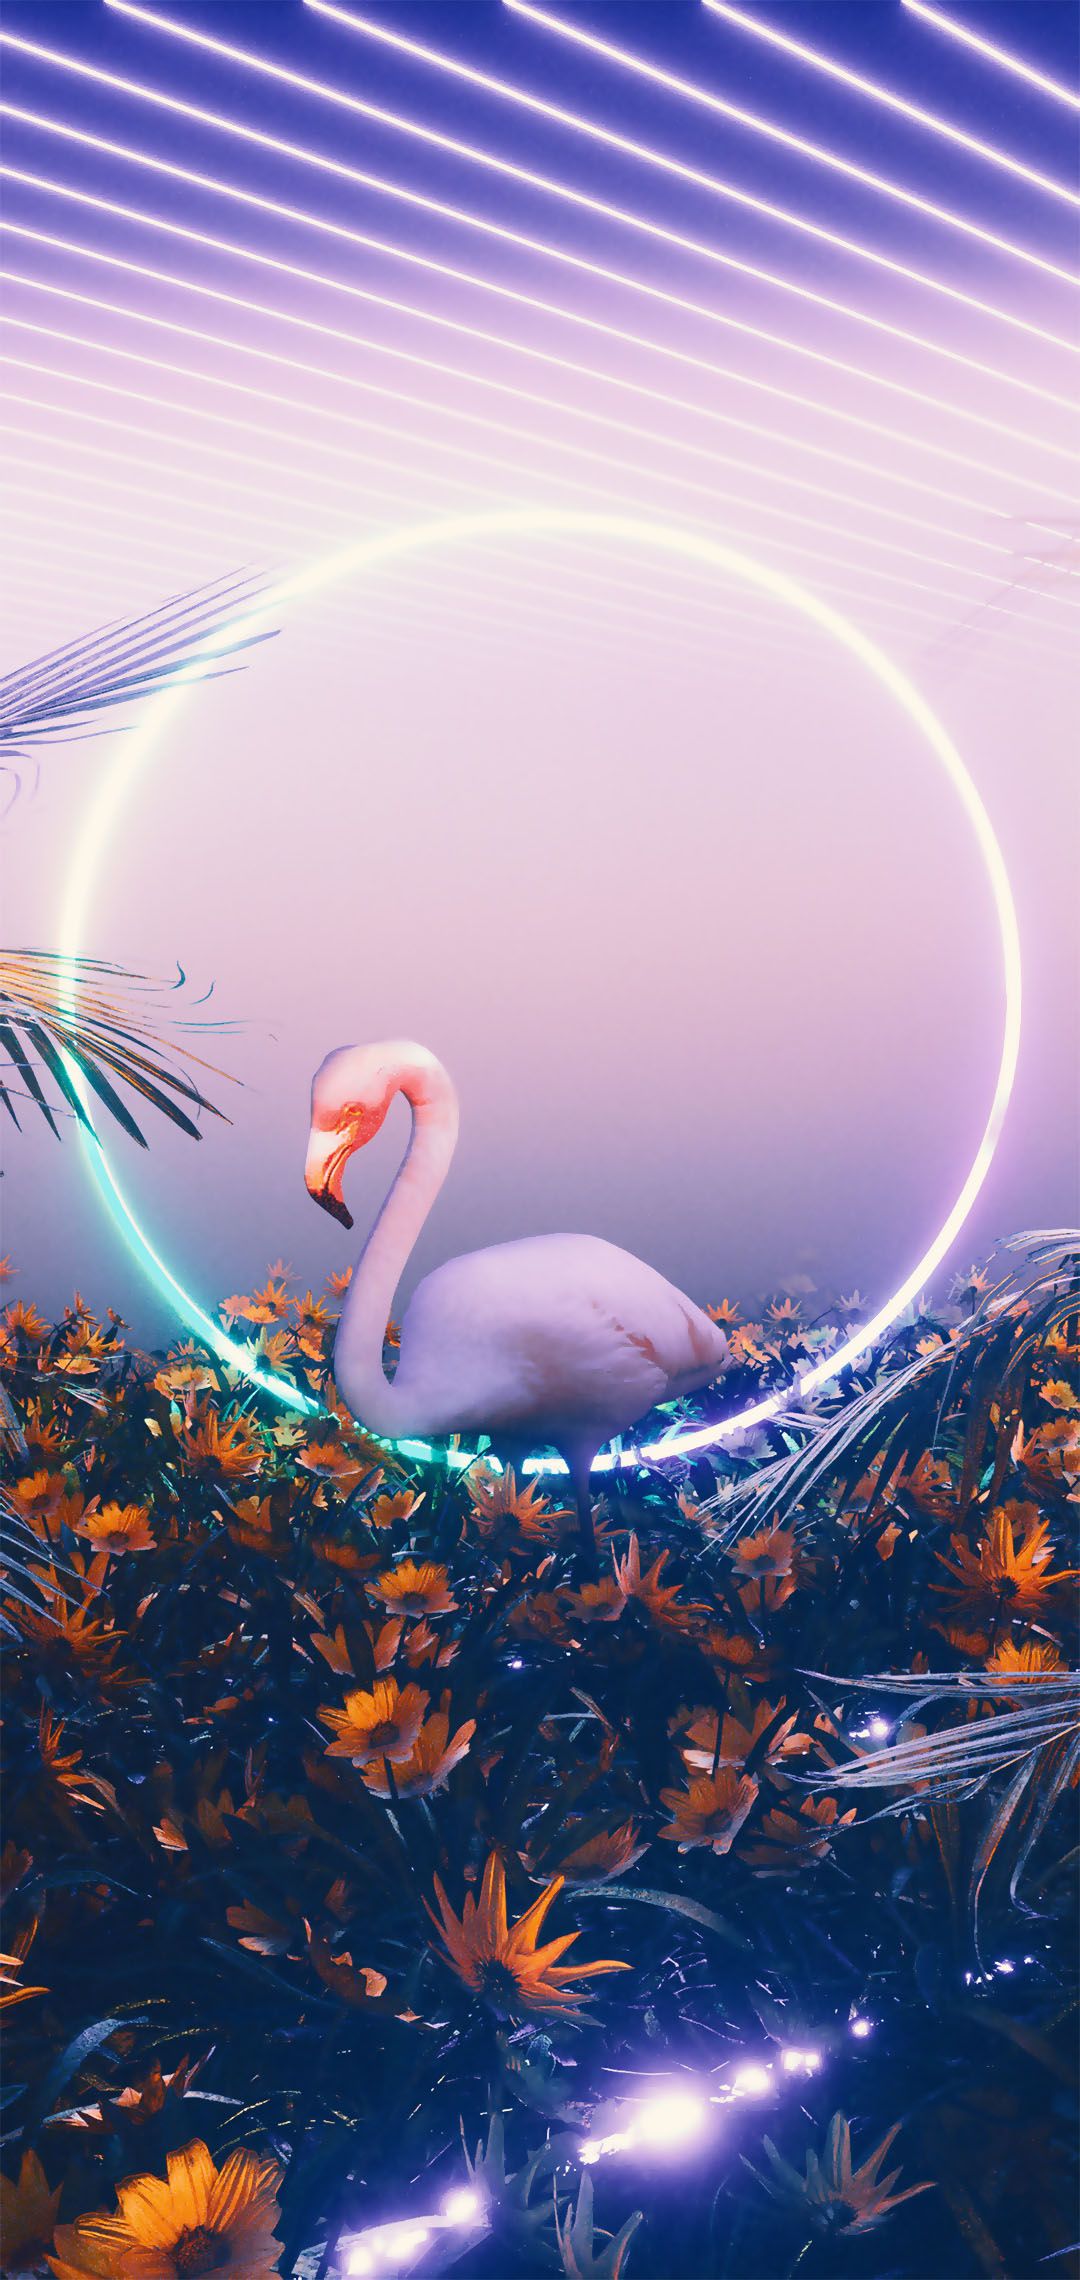 A flamingo is standing in the middle of some flowers - Flamingo, 3D